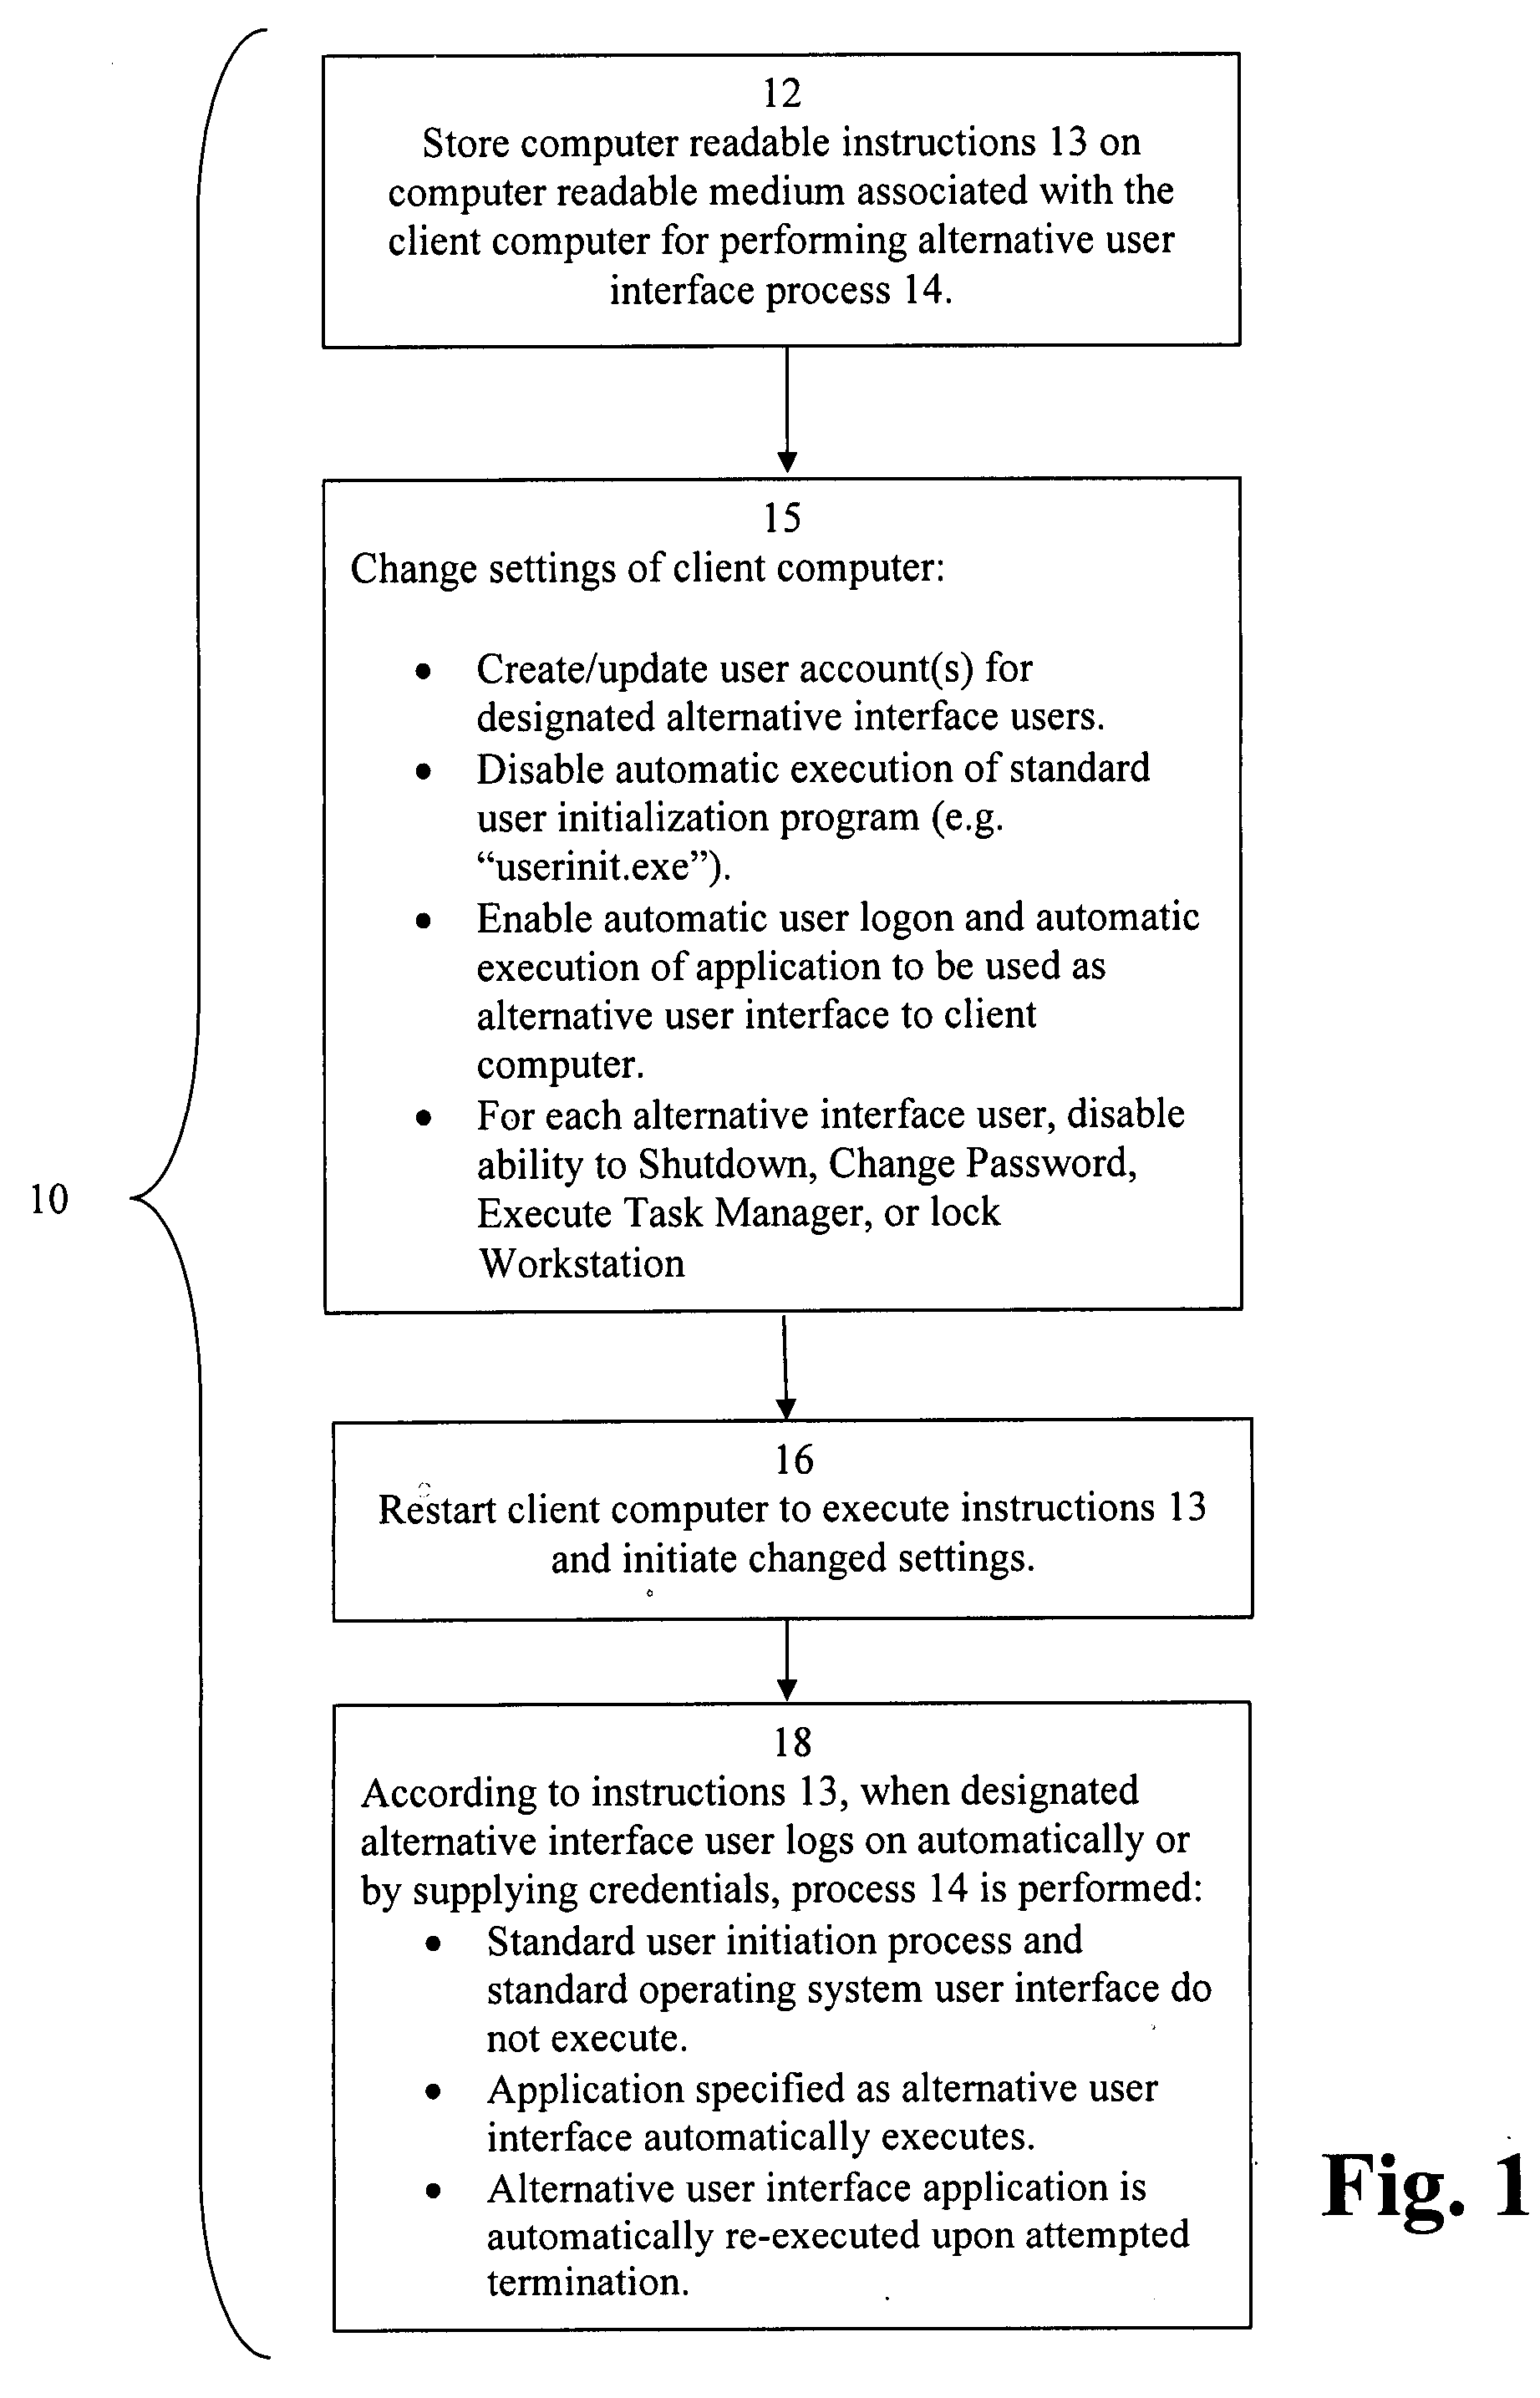 System and method for managing access to resources and functionality of client computers in a client/server environment